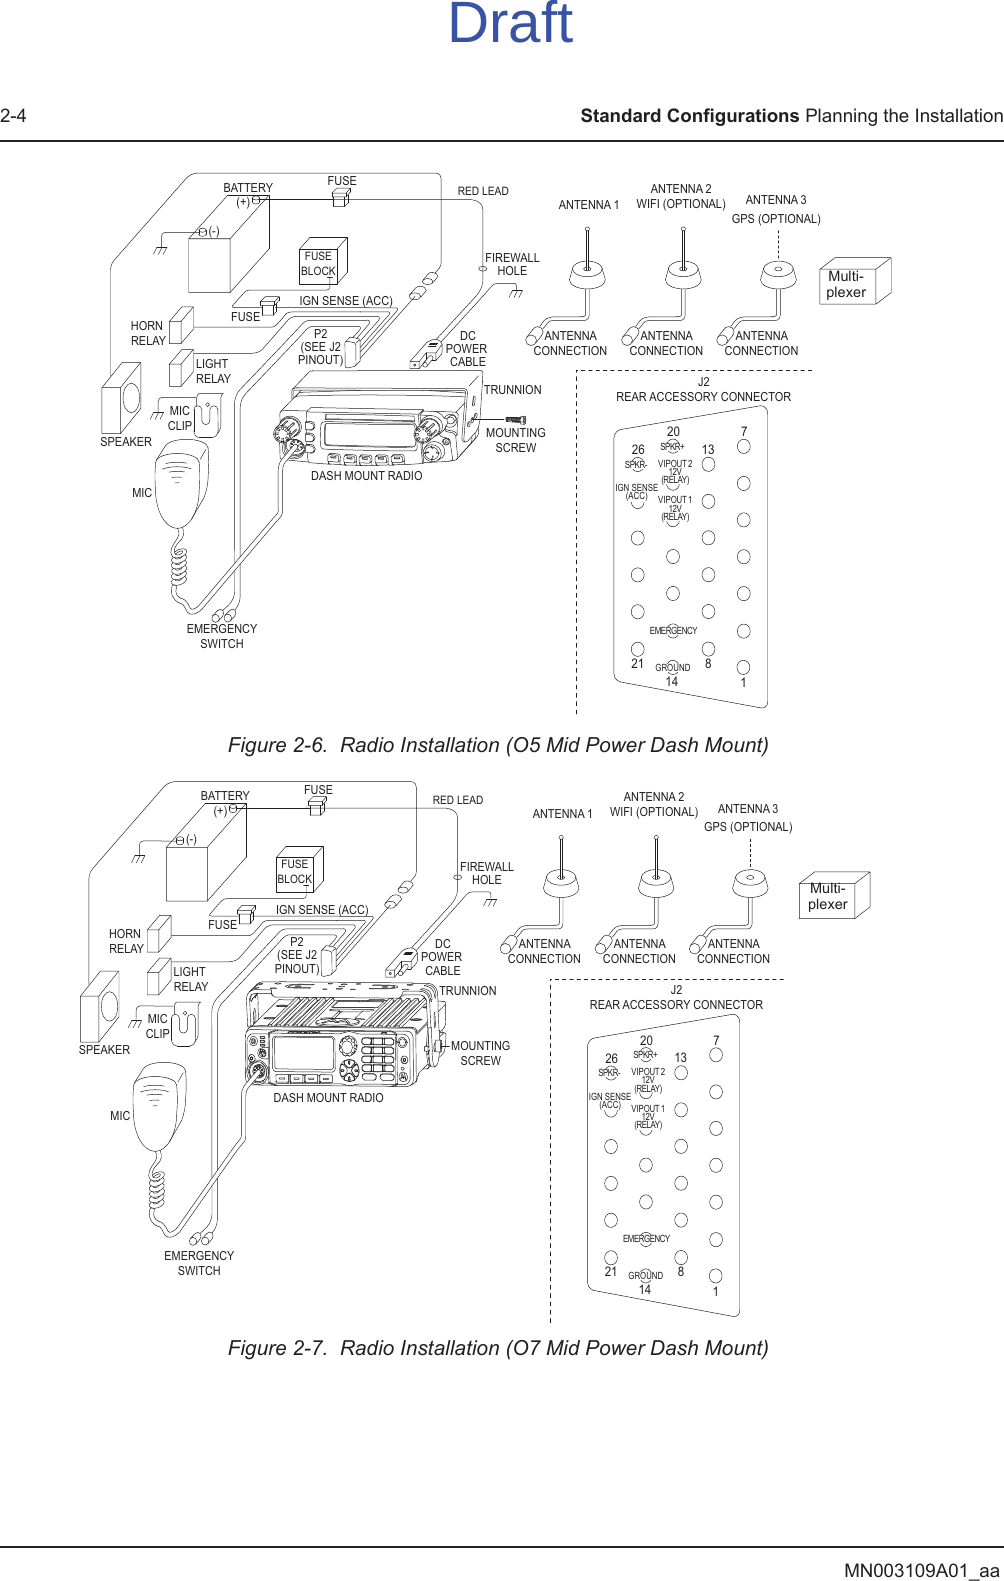 MN003109A01_aa2-4 Standard Configurations Planning the InstallationFigure 2-6.  Radio Installation (O5 Mid Power Dash Mount)Figure 2-7.  Radio Installation (O7 Mid Power Dash Mount)BATTERYHORN RELAYLIGHT RELAYMICCLIPSPEAKERMICEMERGENCYSWITCHFUSEFUSEBLOCK(+)(-)RED LEADFUSEFIREWALLHOLEMOUNTINGSCREWDASH MOUNT RADIOANTENNA CONNECTION ANTENNA 1IGN SENSE (ACC)P2(SEE J2PINOUT)DCPOWER CABLETRUNNION J2REAR ACCESSORY CONNECTOR1781413202126SPKR-SPKR+VIPOUT 212V(RELAY)VIPOUT 112V(RELAY)GROUNDEMERGENCYIGN SENSE(ACC)ANTENNA CONNECTION ANTENNA 2WIFI (OPTIONAL)ANTENNA CONNECTION ANTENNA 3GPS (OPTIONAL)Multi-plexerBATTERYHORN RELAYLIGHT RELAYMICCLIPSPEAKERMICEMERGENCYSWITCHFUSEFUSEBLOCK(+)(-)RED LEADFUSEFIREWALLHOLEMOUNTINGSCREWDASH MOUNT RADIOANTENNA CONNECTION ANTENNA 1IGN SENSE (ACC)P2(SEE J2PINOUT)DCPOWER CABLETRUNNION J2REAR ACCESSORY CONNECTOR1781413202126SPKR-SPKR+VIPOUT 212V(RELAY)VIPOUT 112V(RELAY)GROUNDEMERGENCYIGN SENSE(ACC)ANTENNA CONNECTION ANTENNA 2WIFI (OPTIONAL)ANTENNA CONNECTION ANTENNA 3GPS (OPTIONAL)Multi-plexerDraft